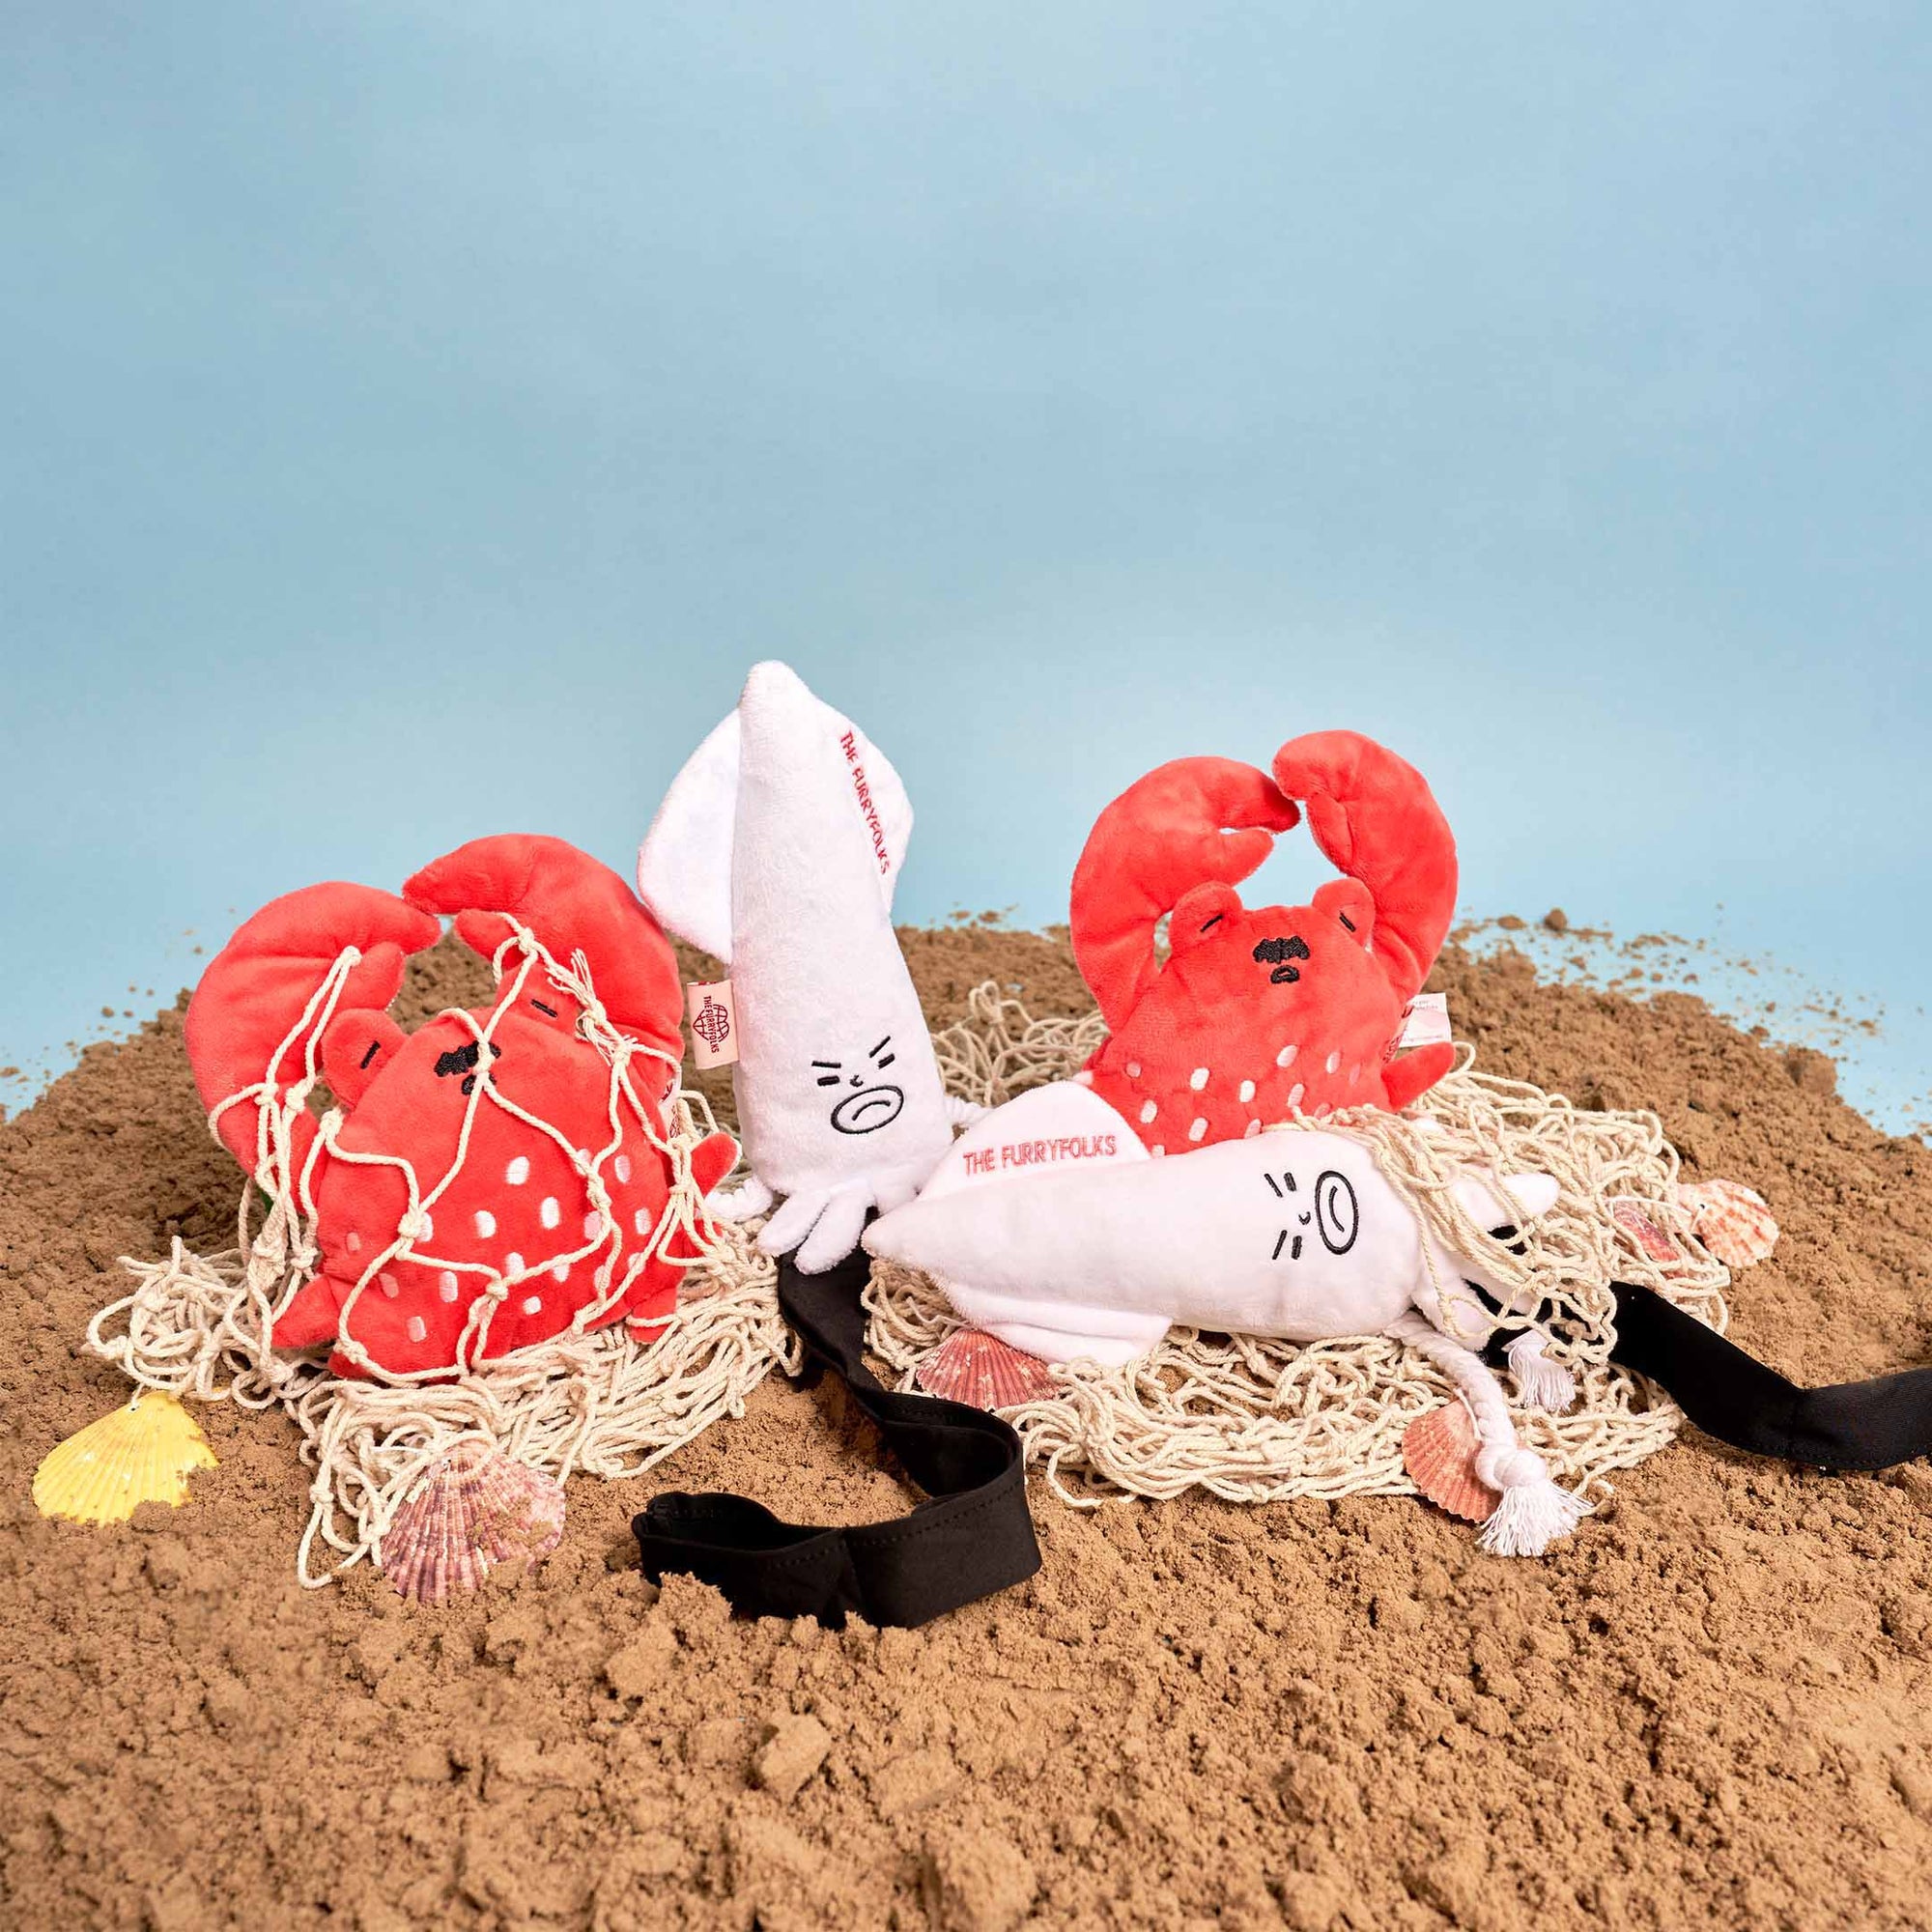 Red crab toys and white squid toy on sand with fishing net and seashells.